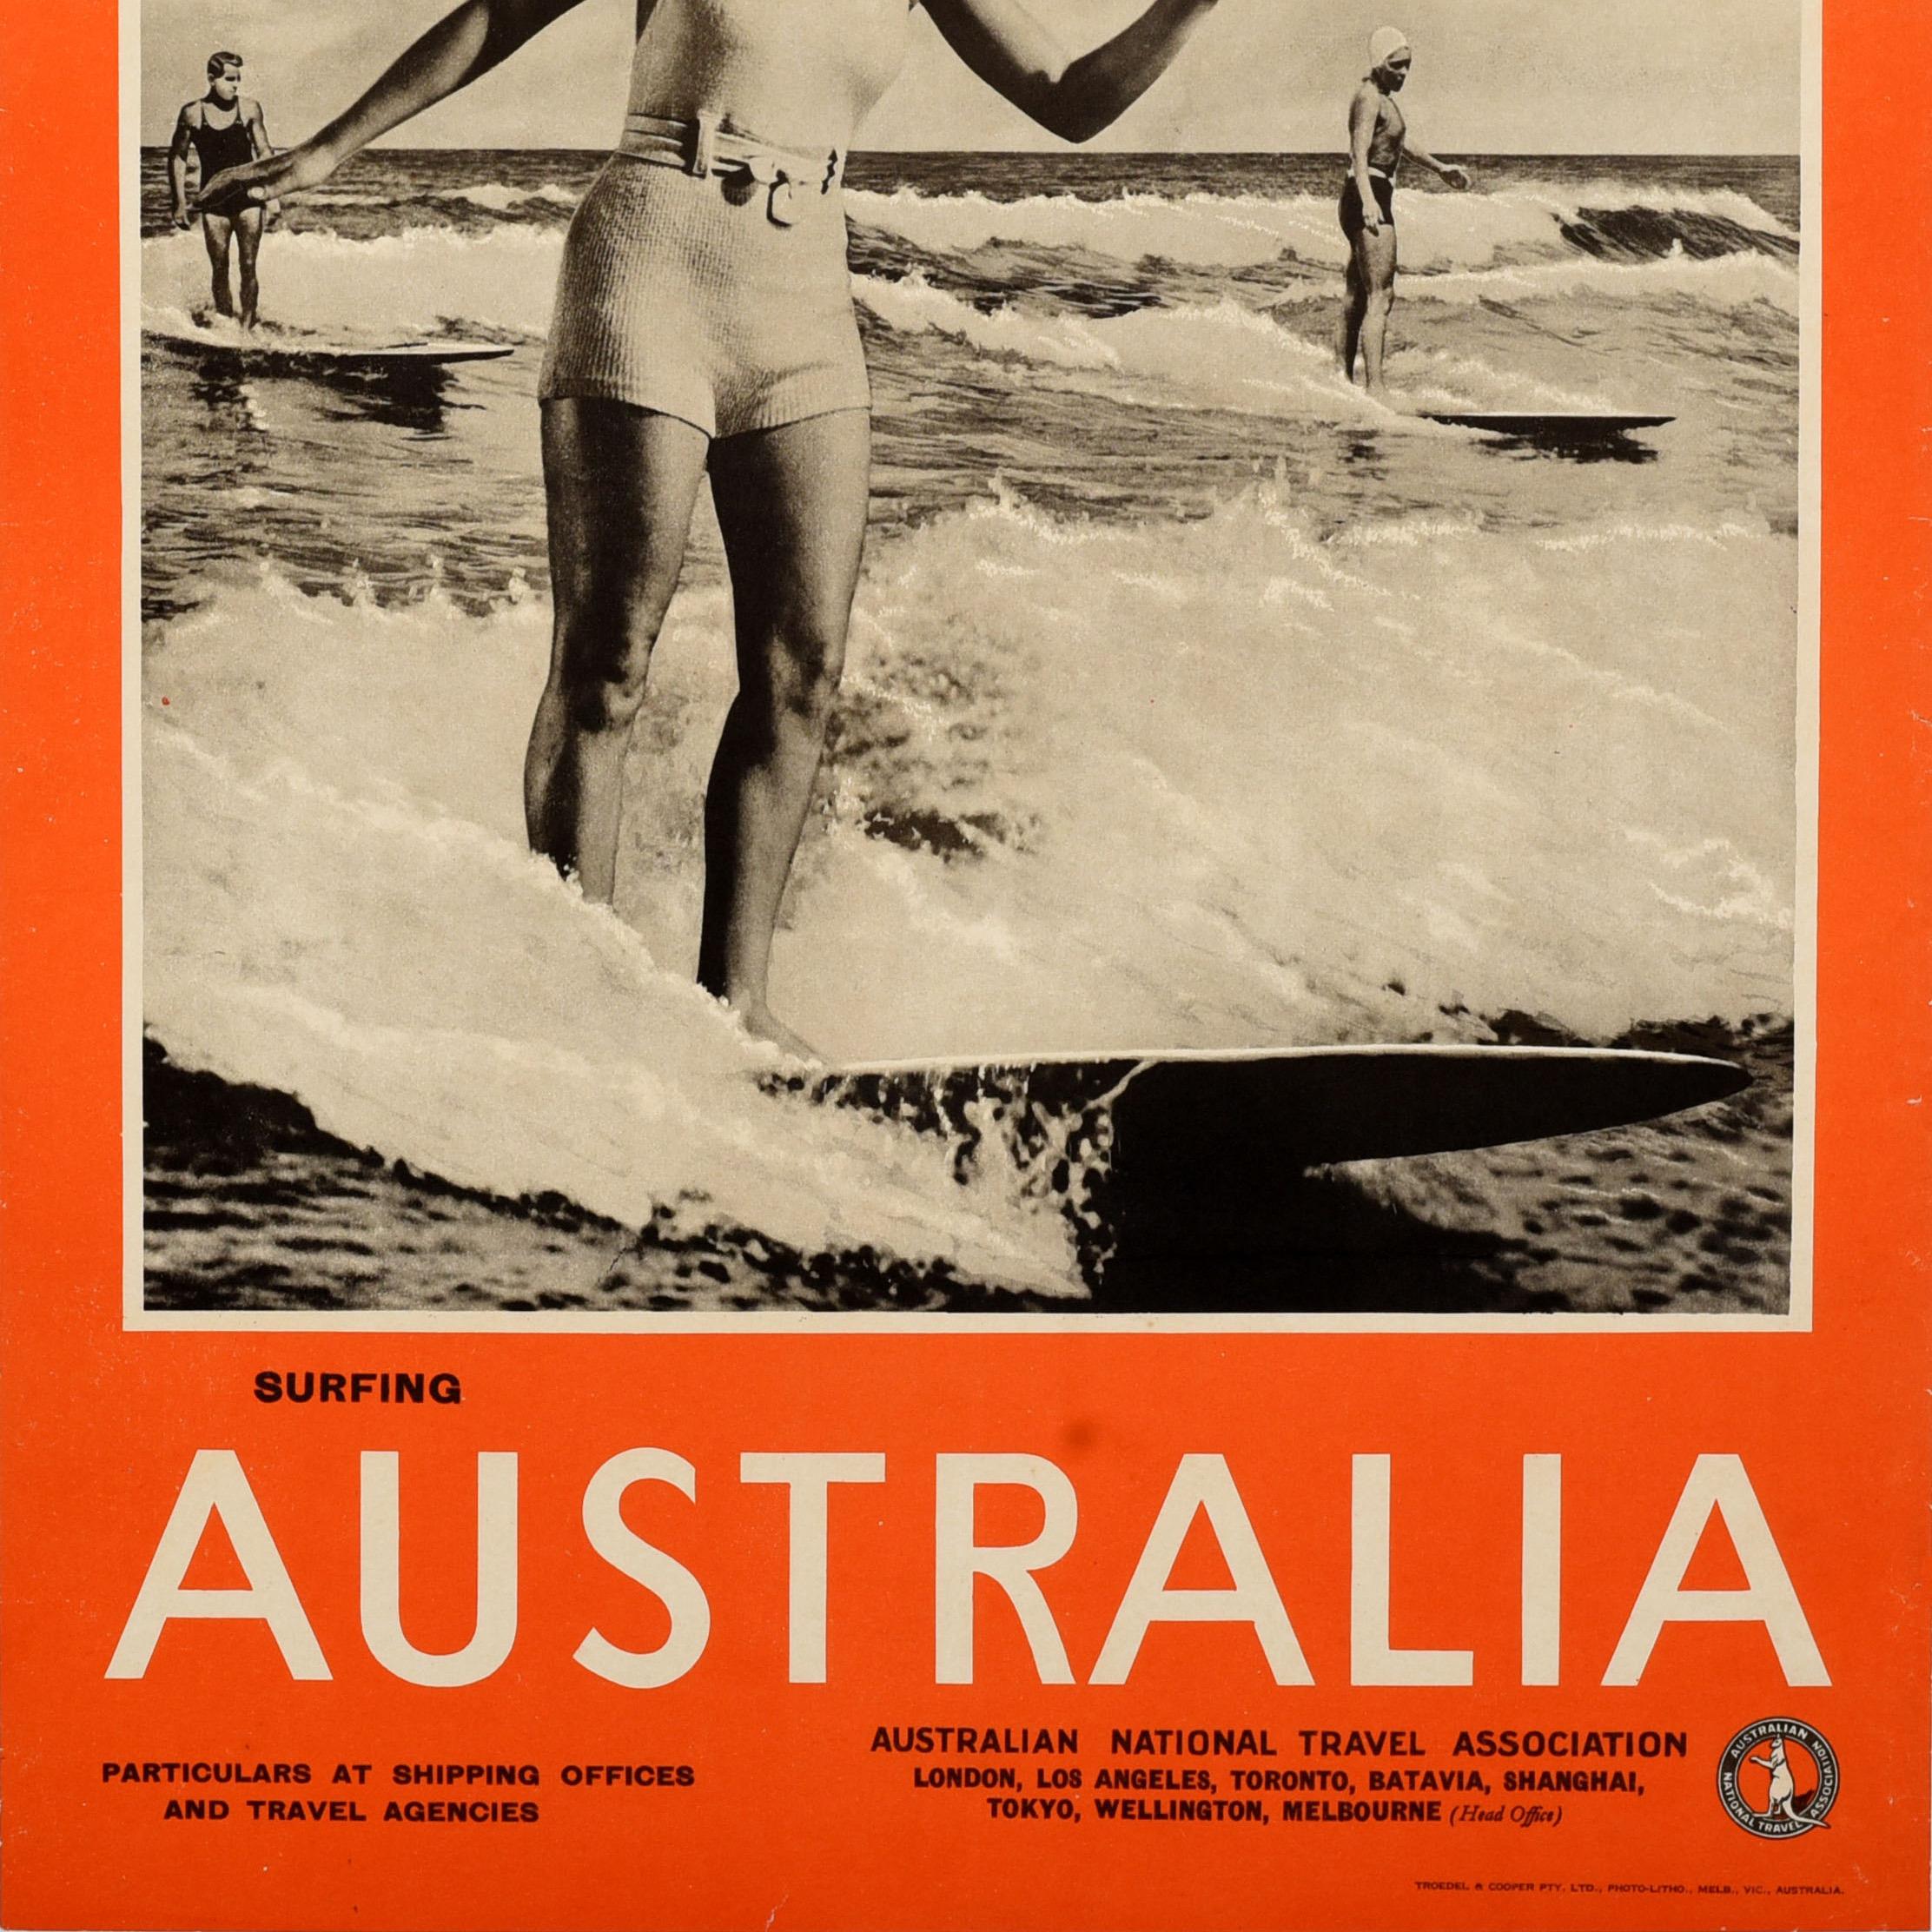 Original vintage sport themed travel poster - Surfing Australia - featuring a black and white photograph of a smiling lady in a swimming suit and cap surfing on a wave with two men on surfboards in the sea in the background, the image within a bold